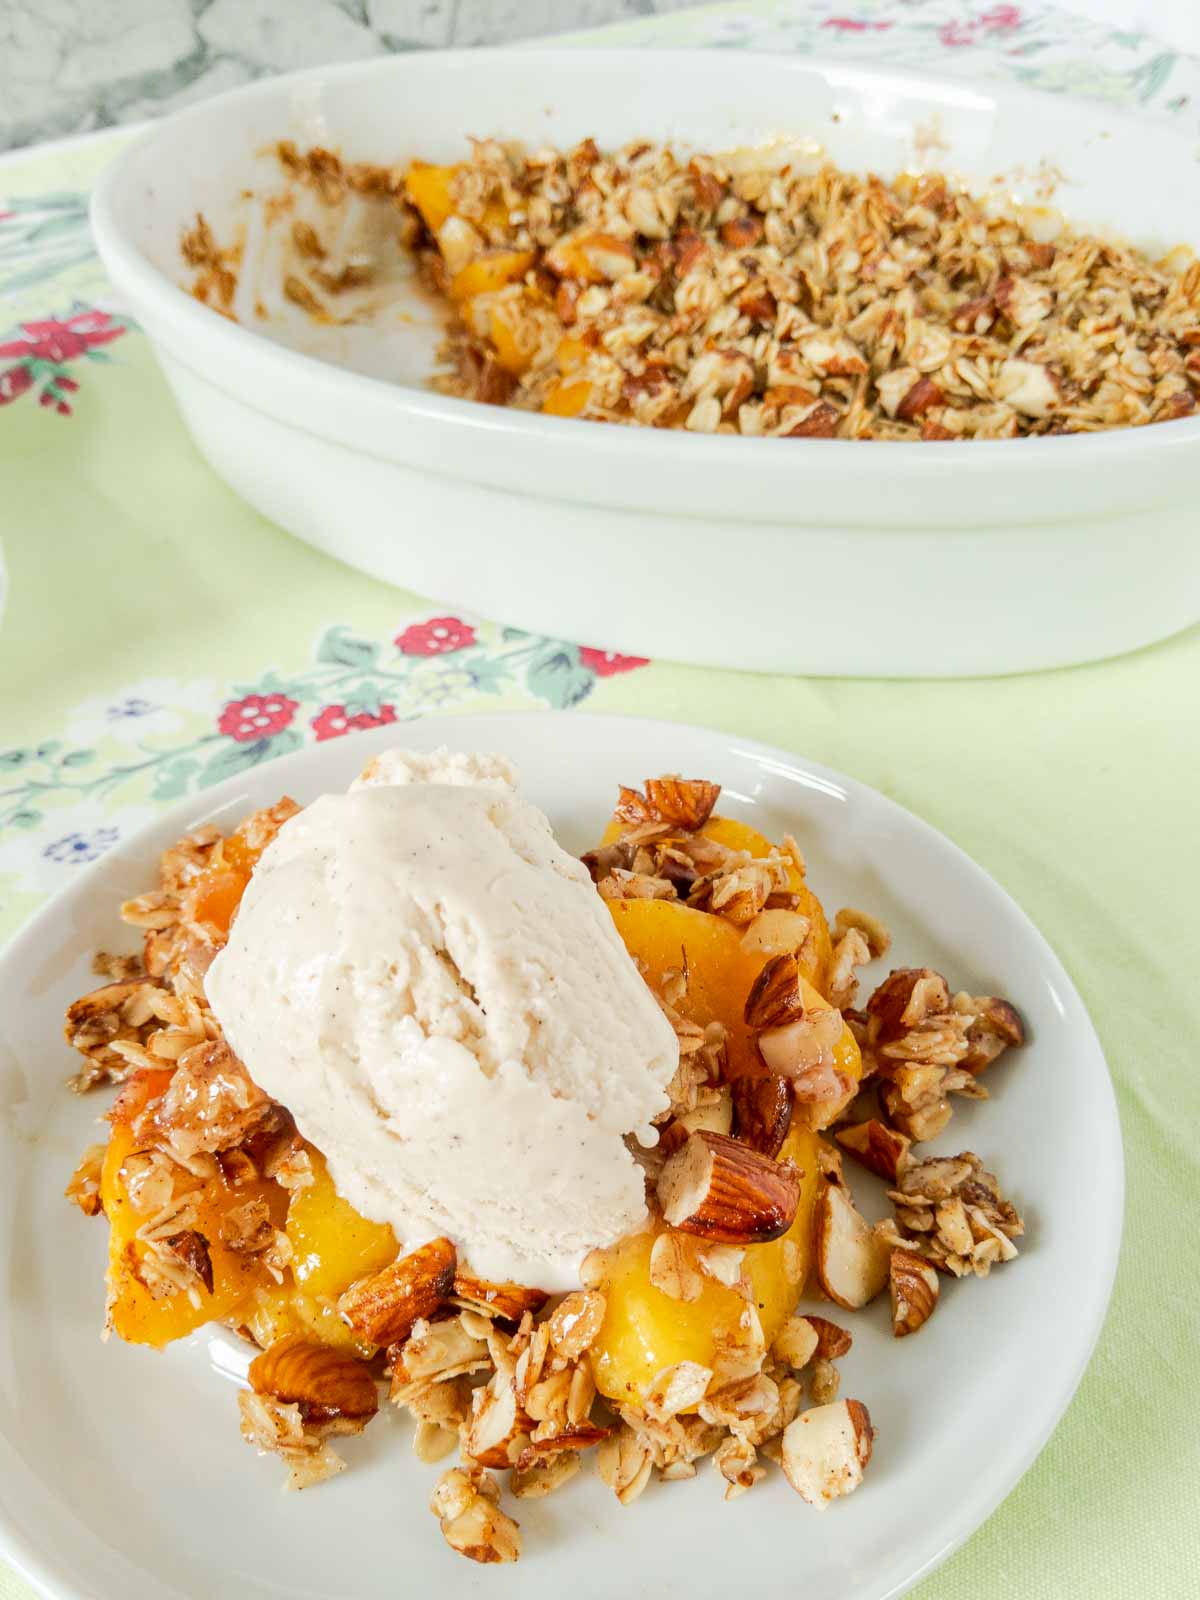 serving of peach crisp with baking dish in background